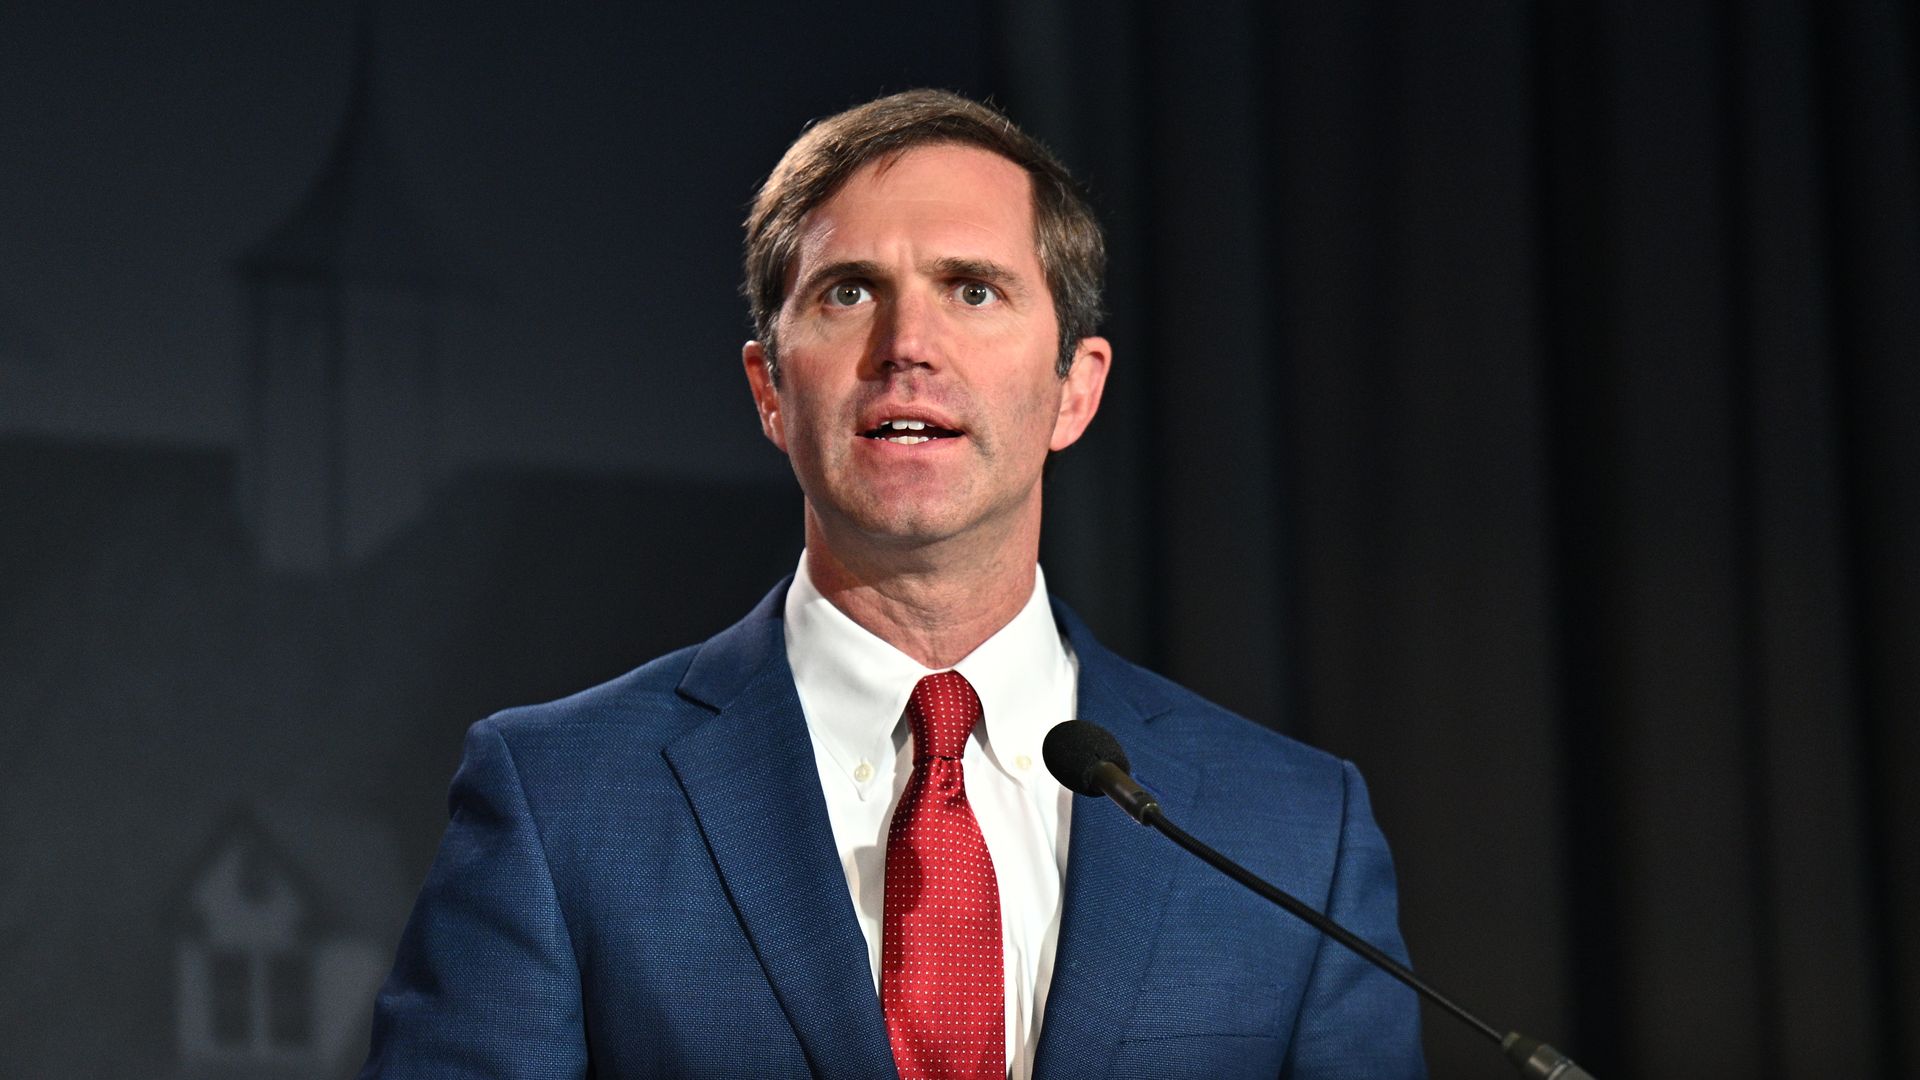  Andy Beshear, Governor of Kentucky, Commonwealth of Kentucky, speaks onstage during the 2022 Concordia Lexington Summit - Day 2 at Lexington Marriott City Center on April 08.